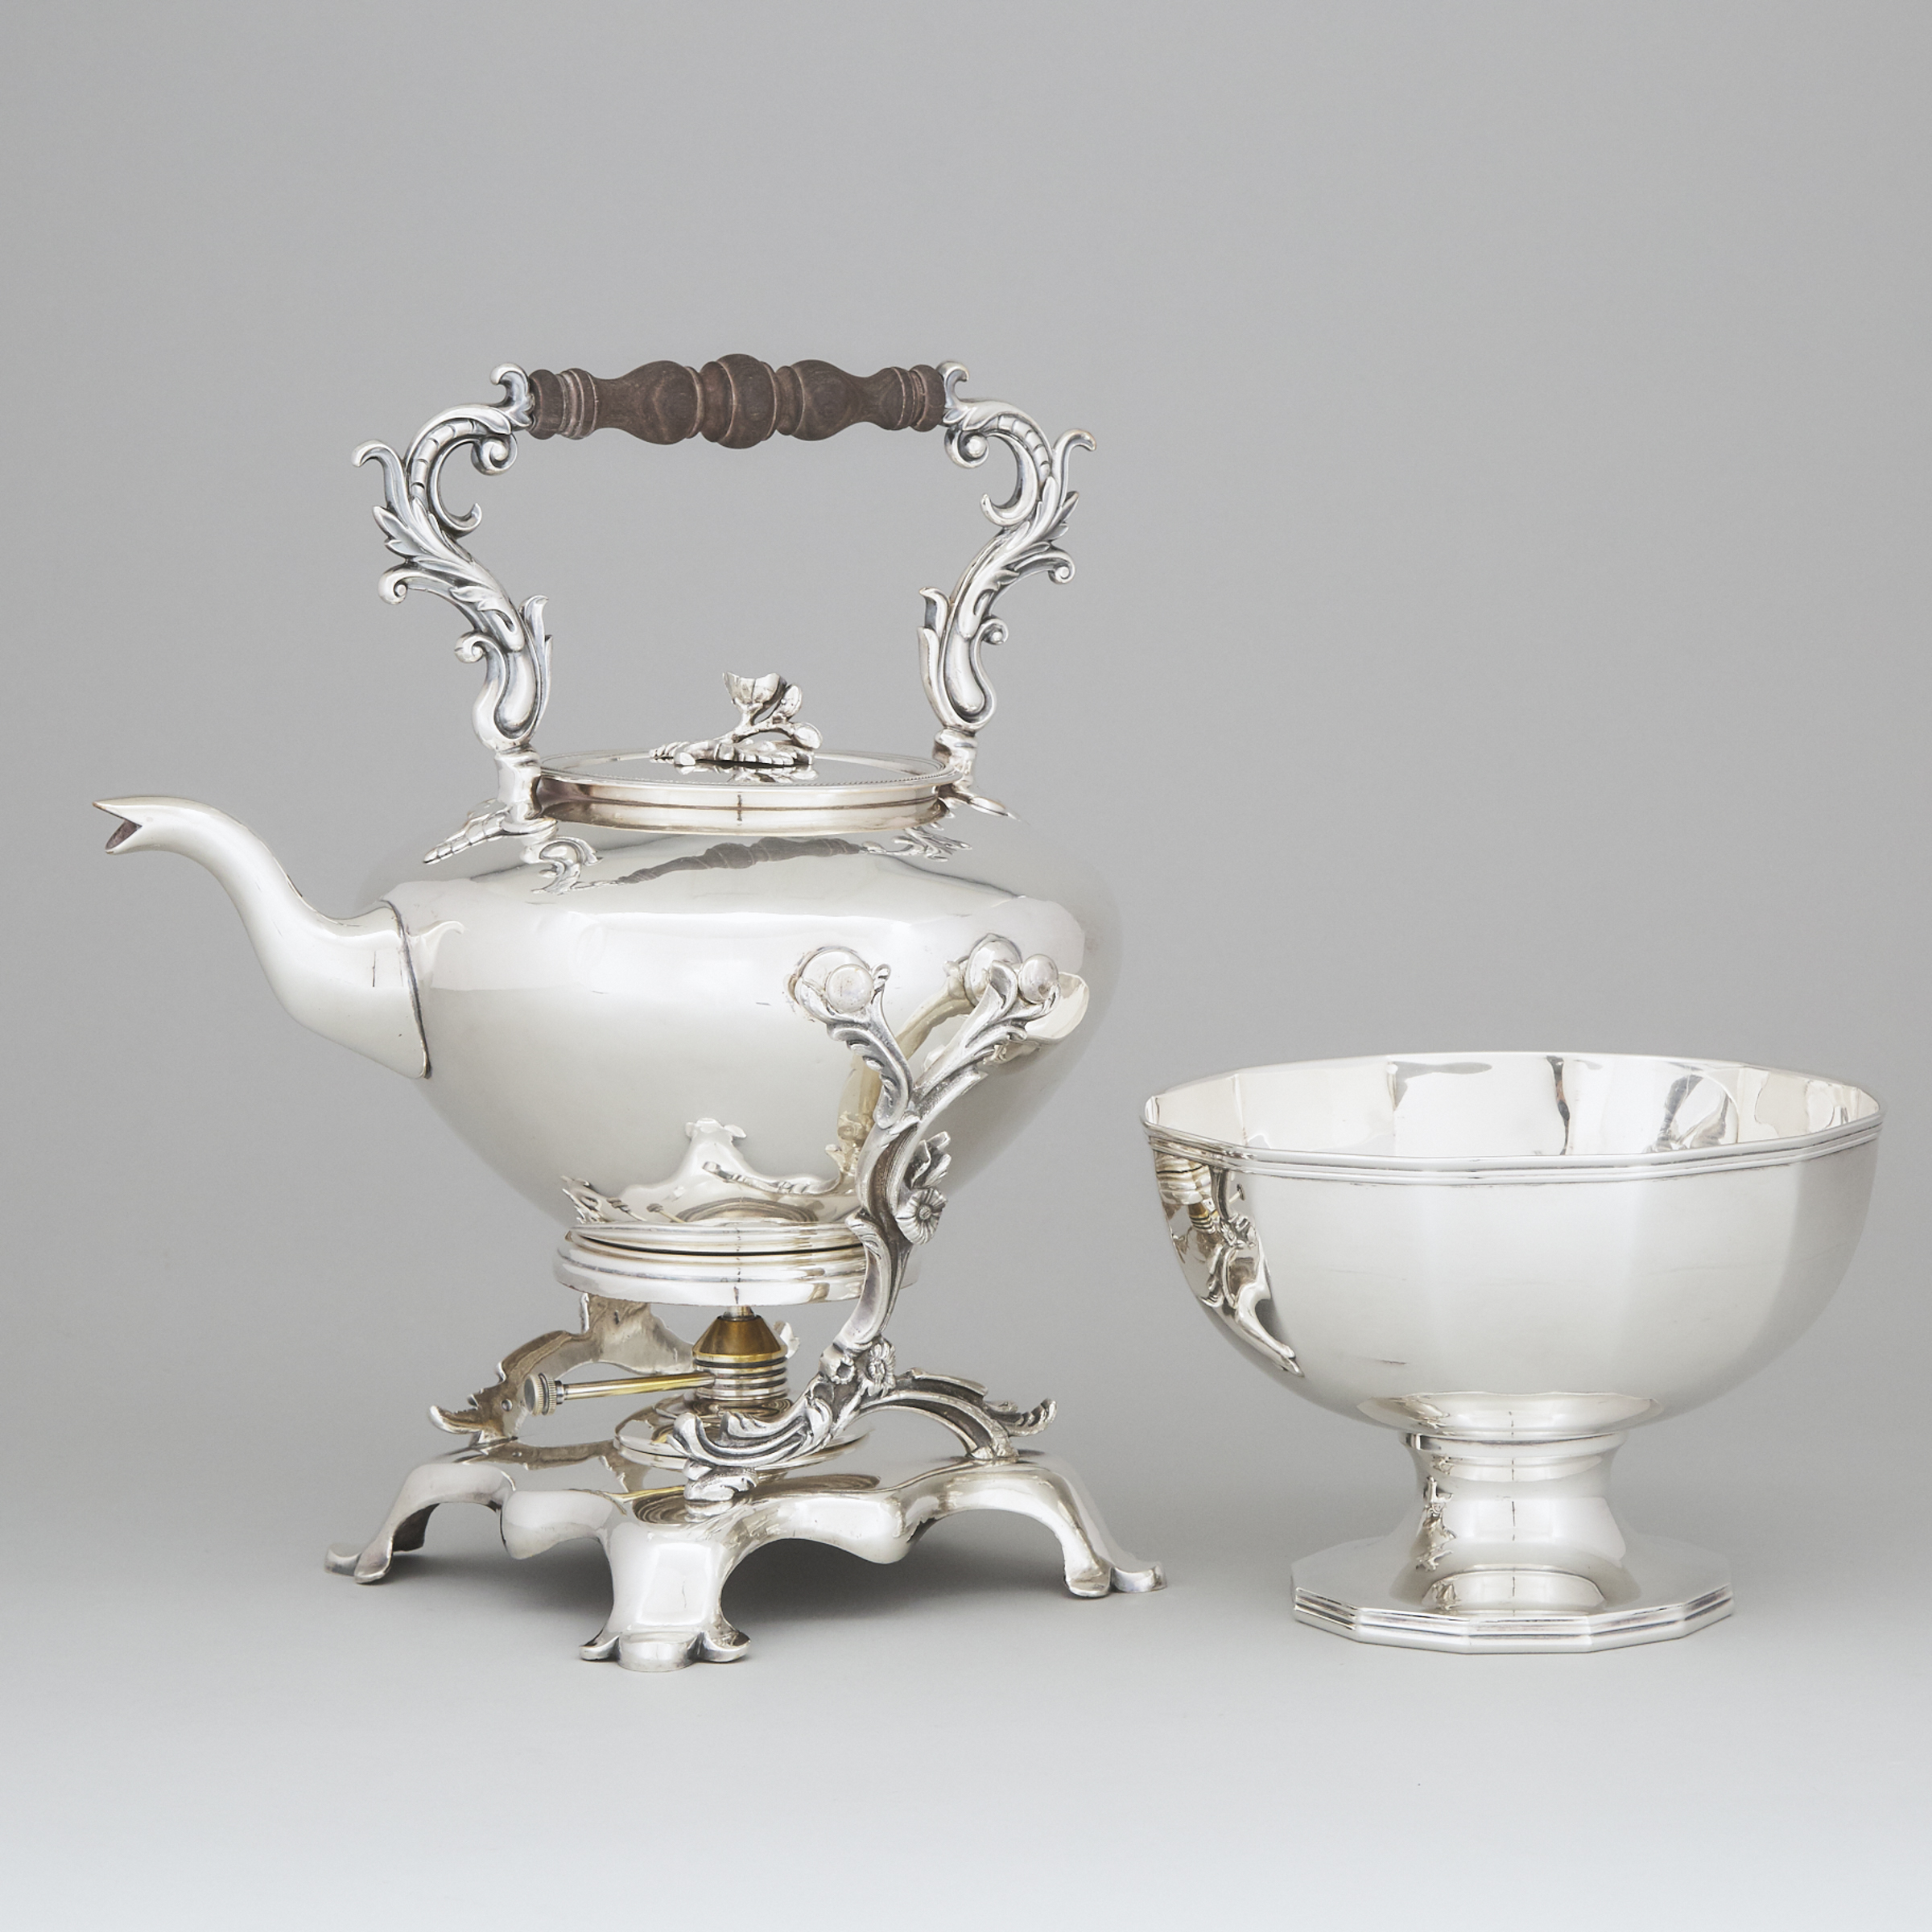 Silver Plated Tea Kettle on Lampstand and a Footed Bowl, 20th century